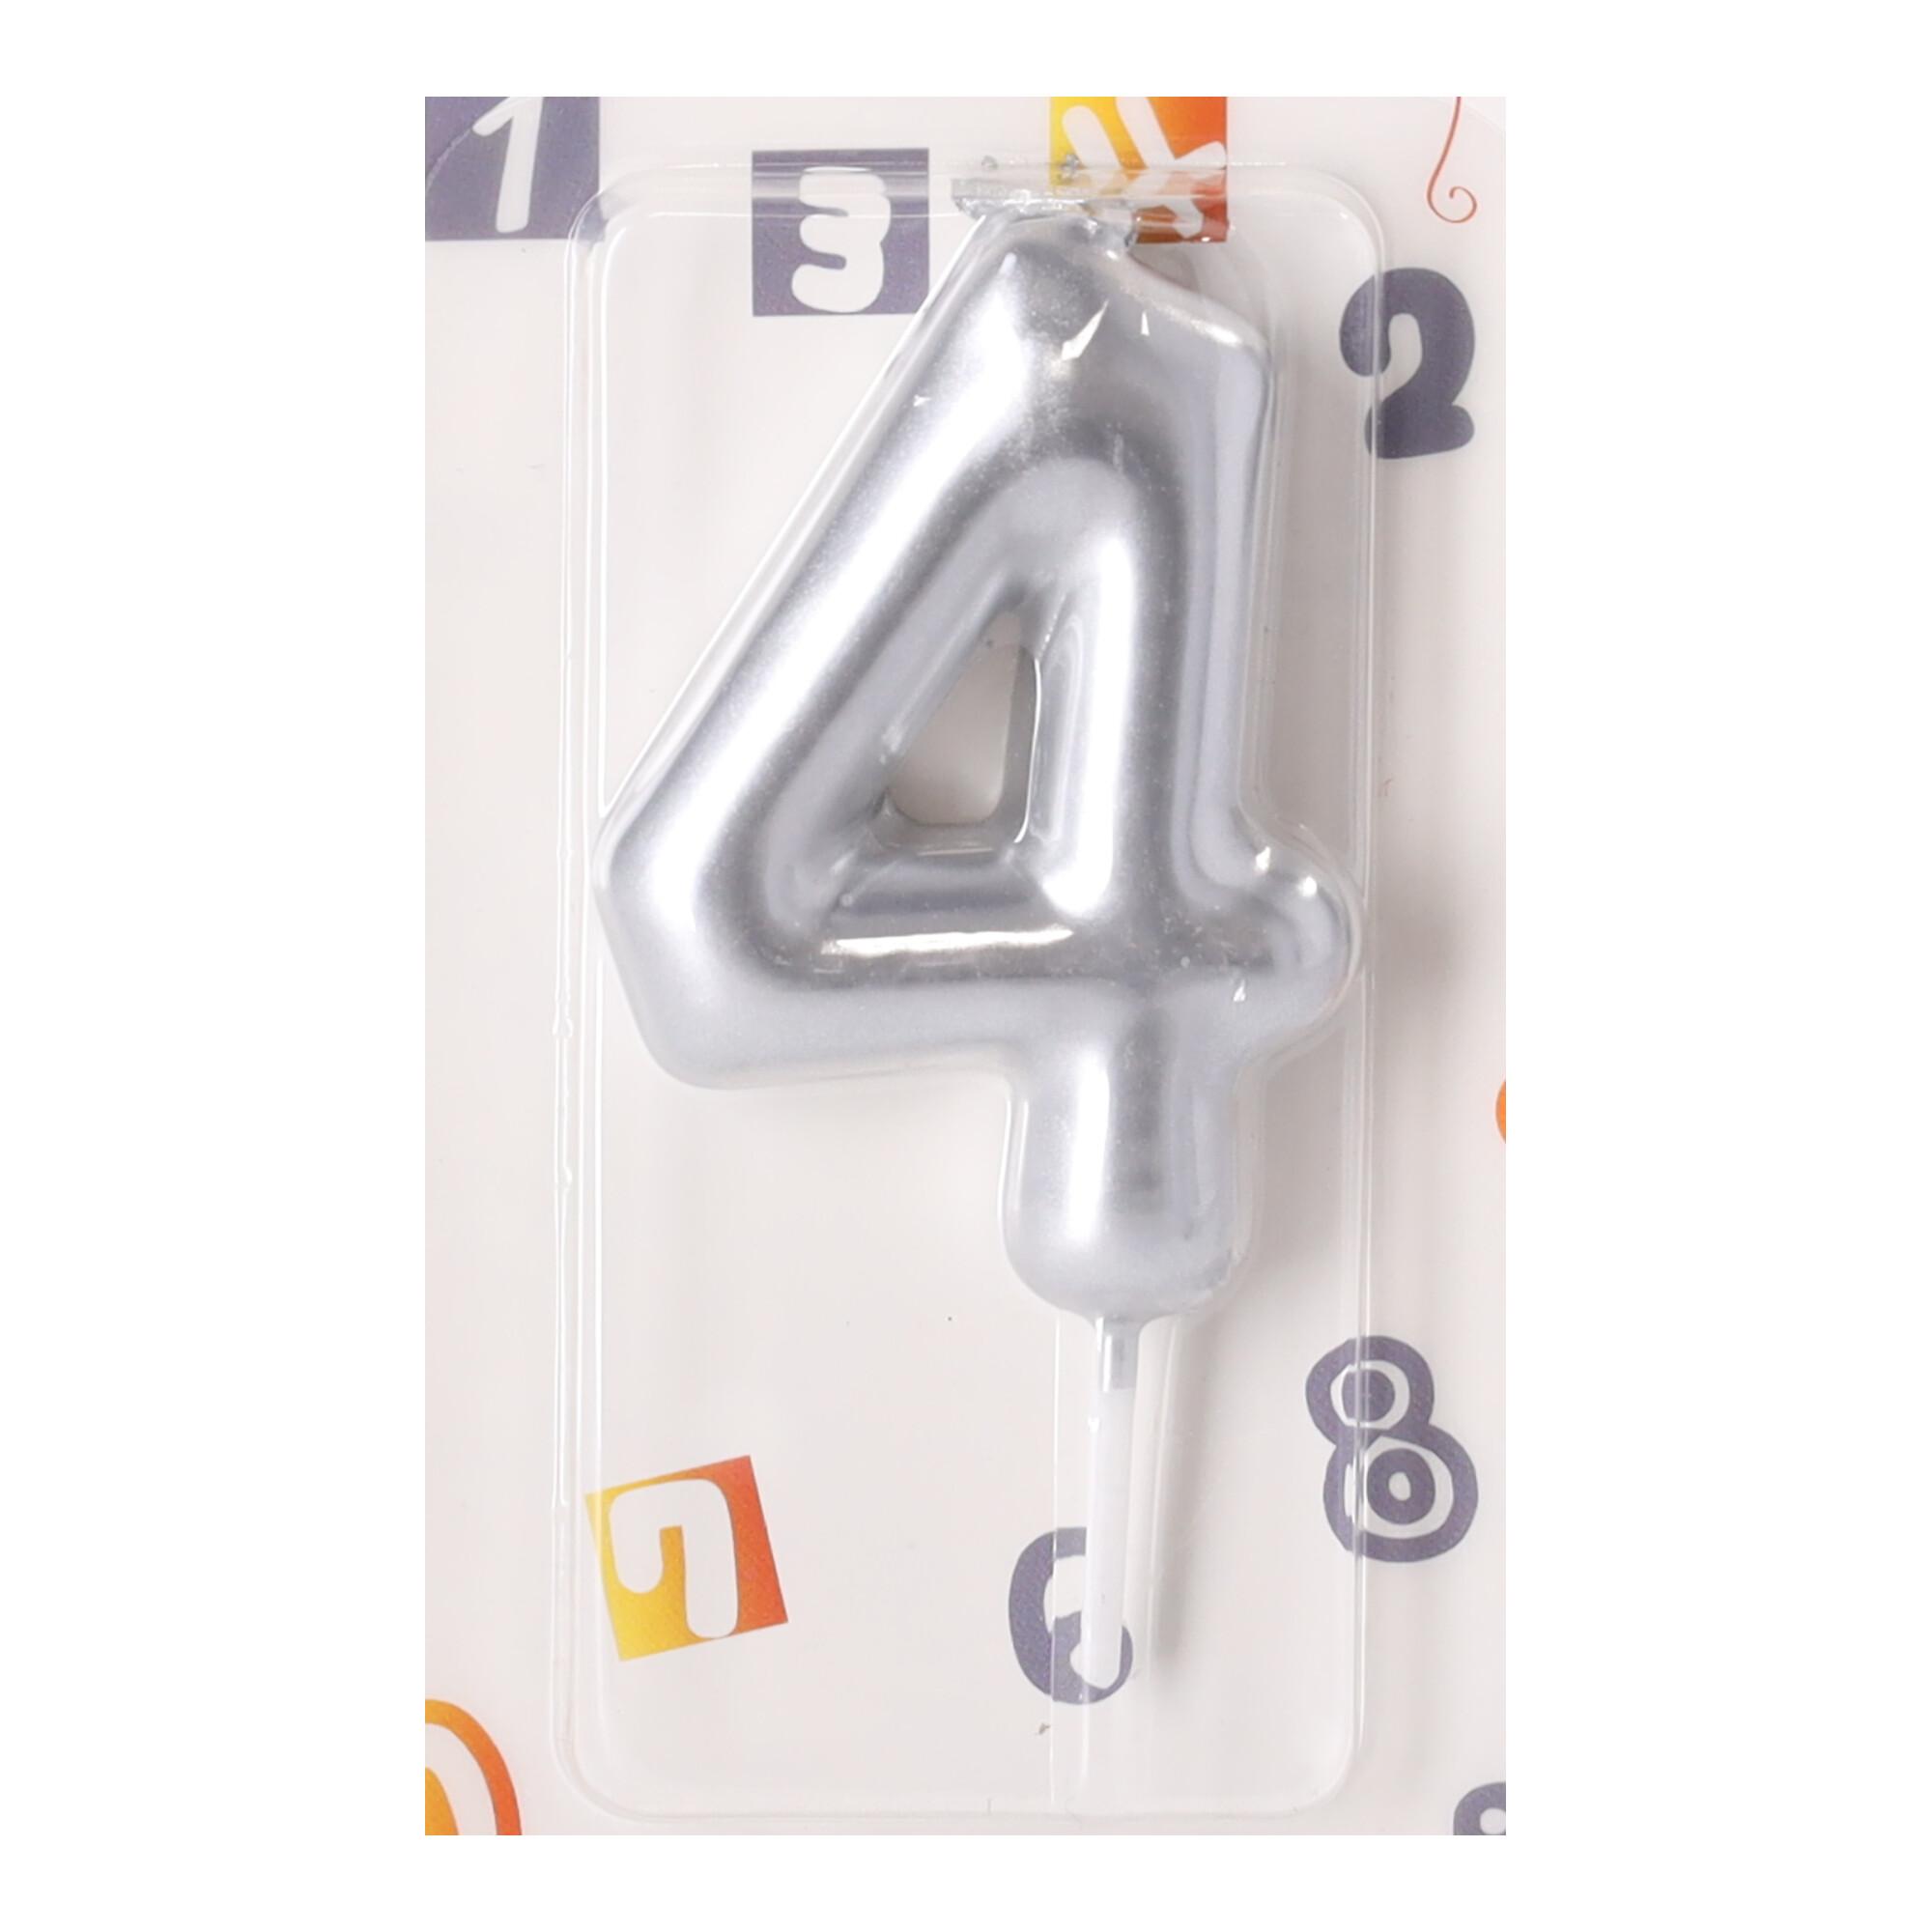 A birthday cake candle 4 - silver